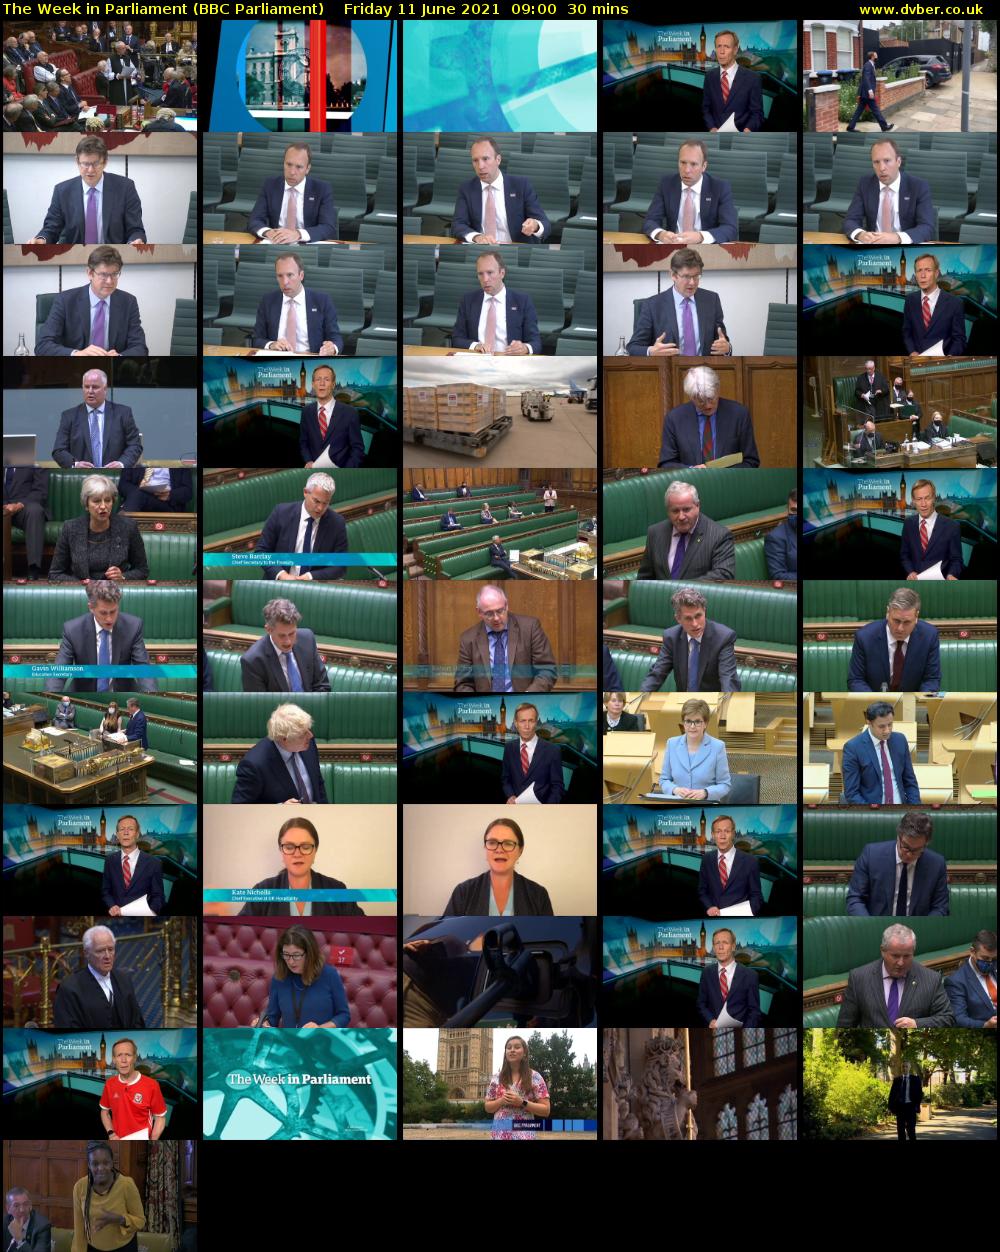 The Week in Parliament (BBC Parliament) Friday 11 June 2021 09:00 - 09:30